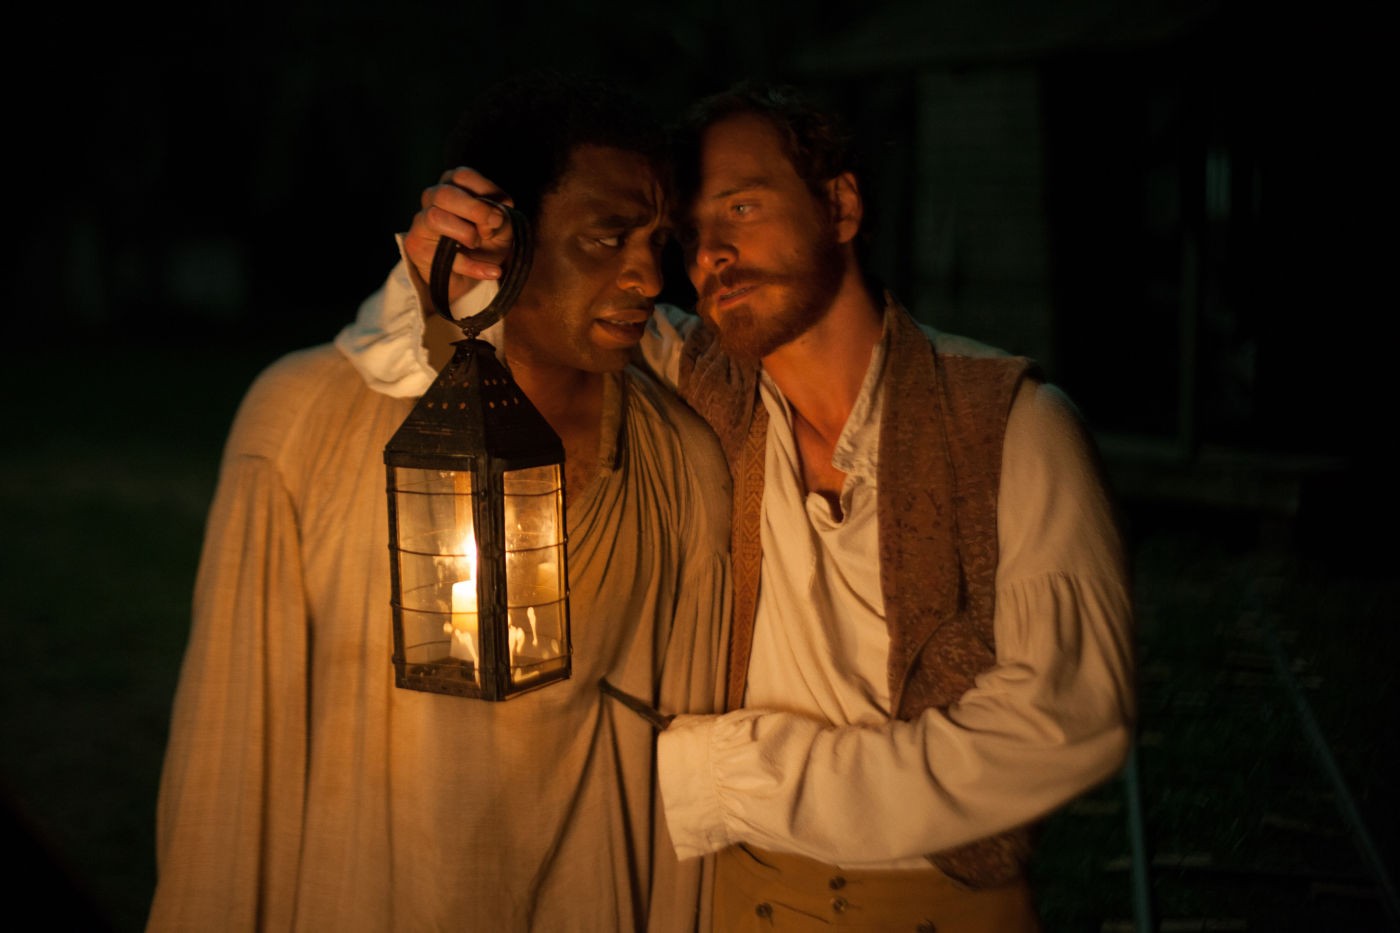 Chiwetel Ejiofor stars as Solomon Northup and Michael Fassbender stars as Edwin Epps in Fox Searchlight Pictures' 12 Years a Slave (2013)